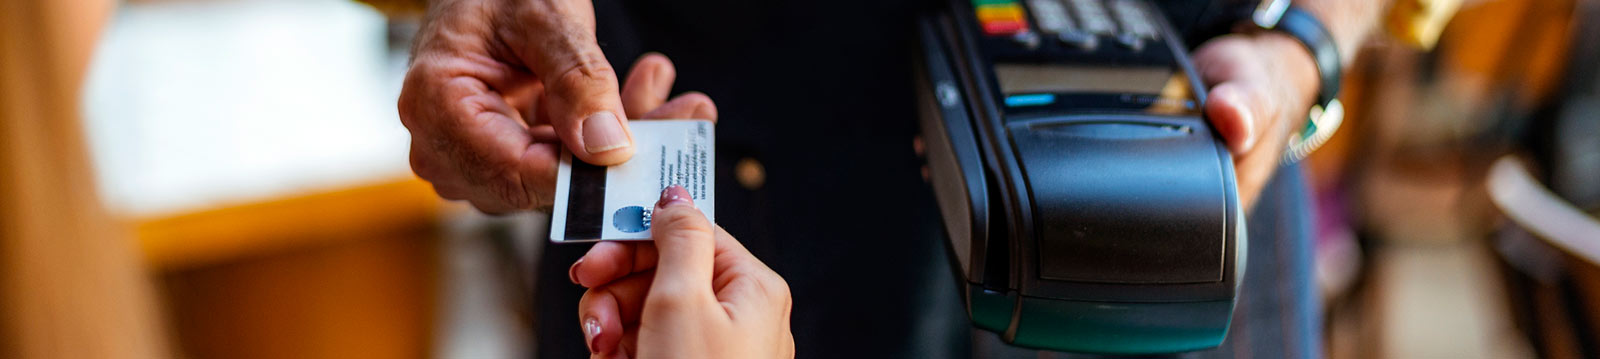 a person using a credit or debit card